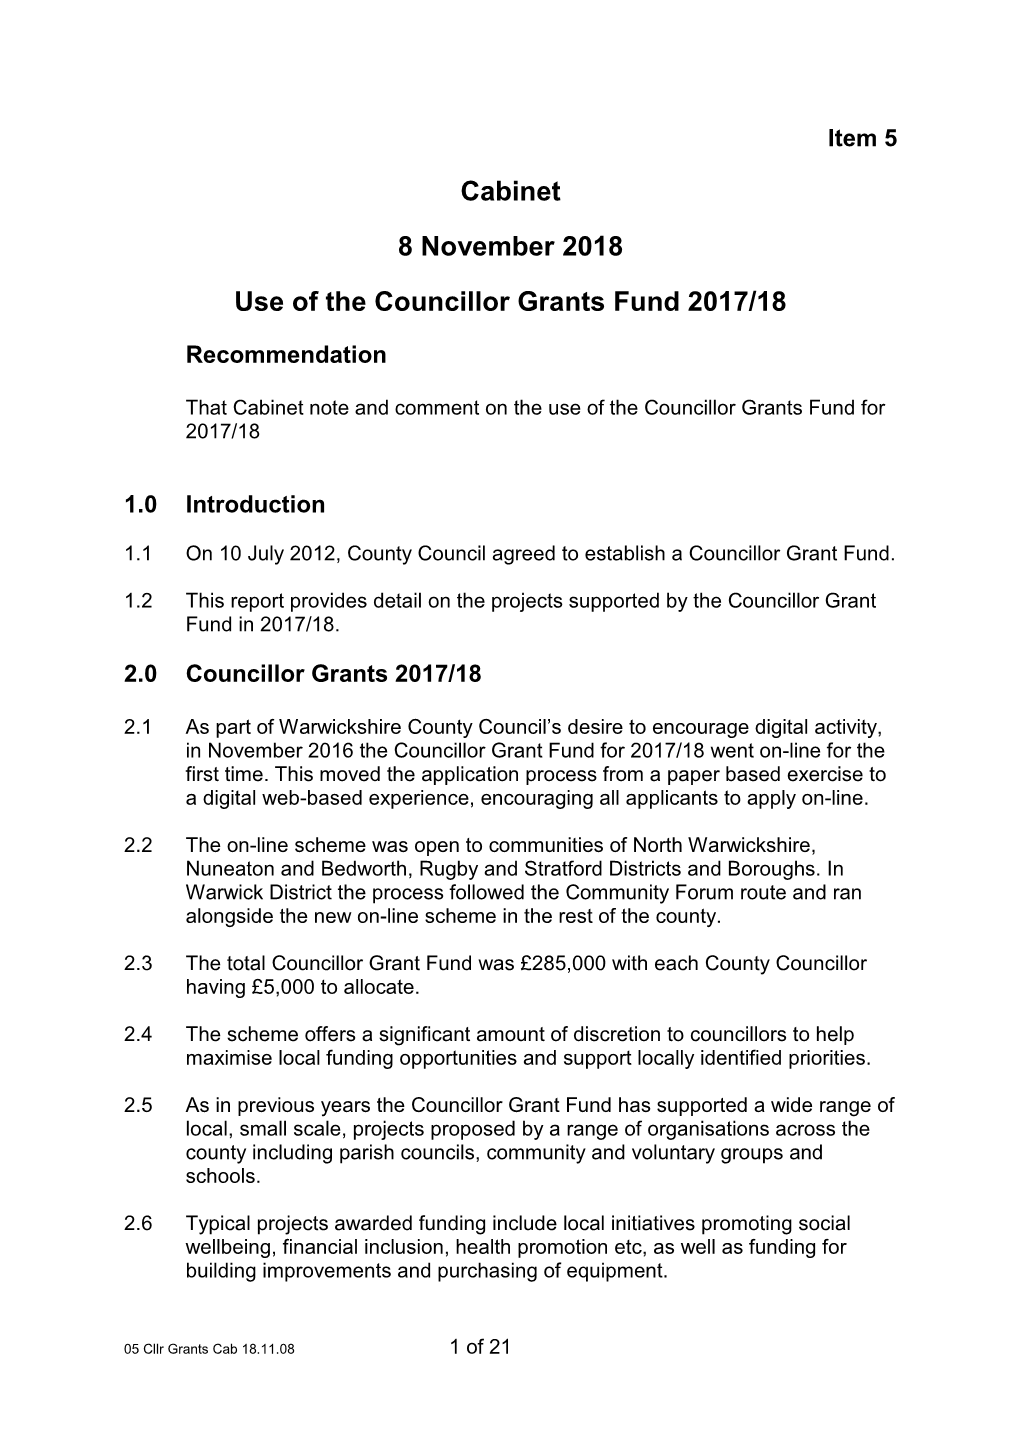 Cabinet 8 November 2018 Use of the Councillor Grants Fund 2017/18